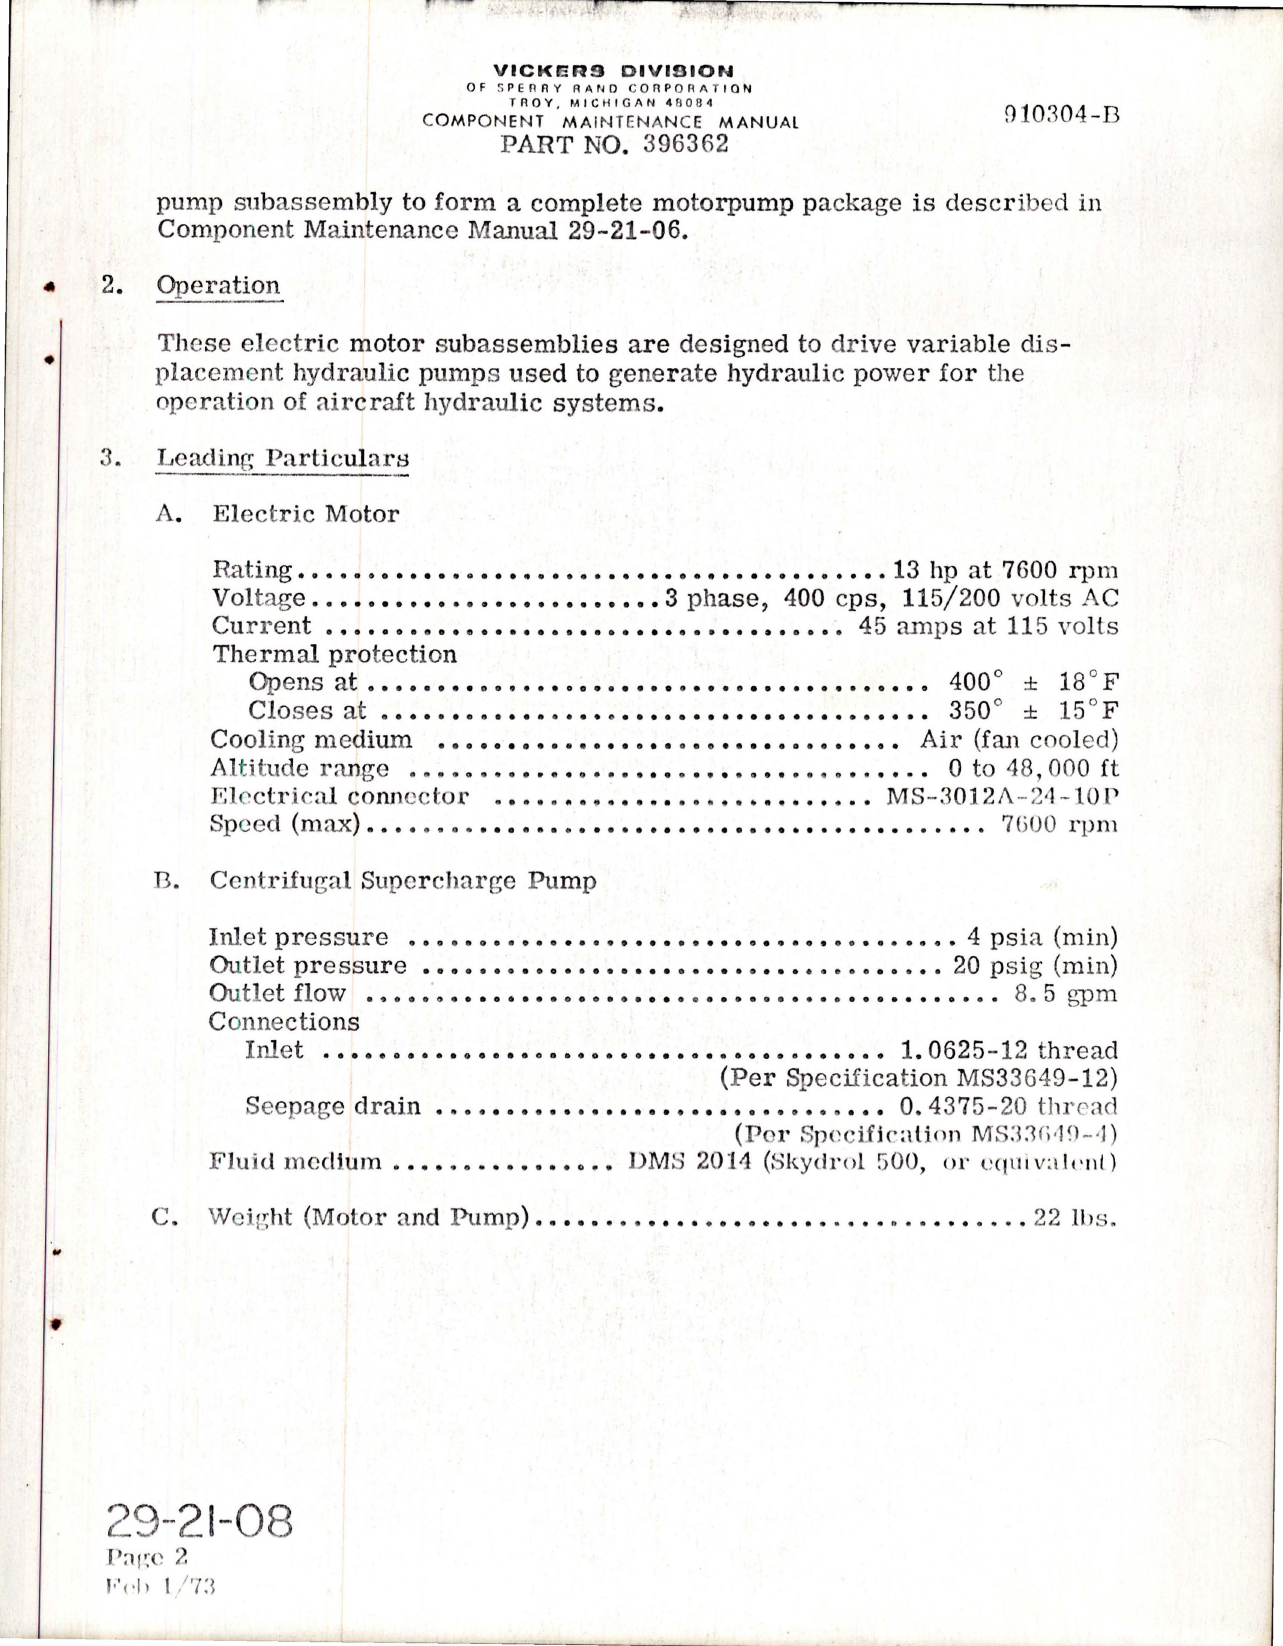 Sample page 9 from AirCorps Library document: Component Maintenance Manual for Electric Motor - Part 396362 